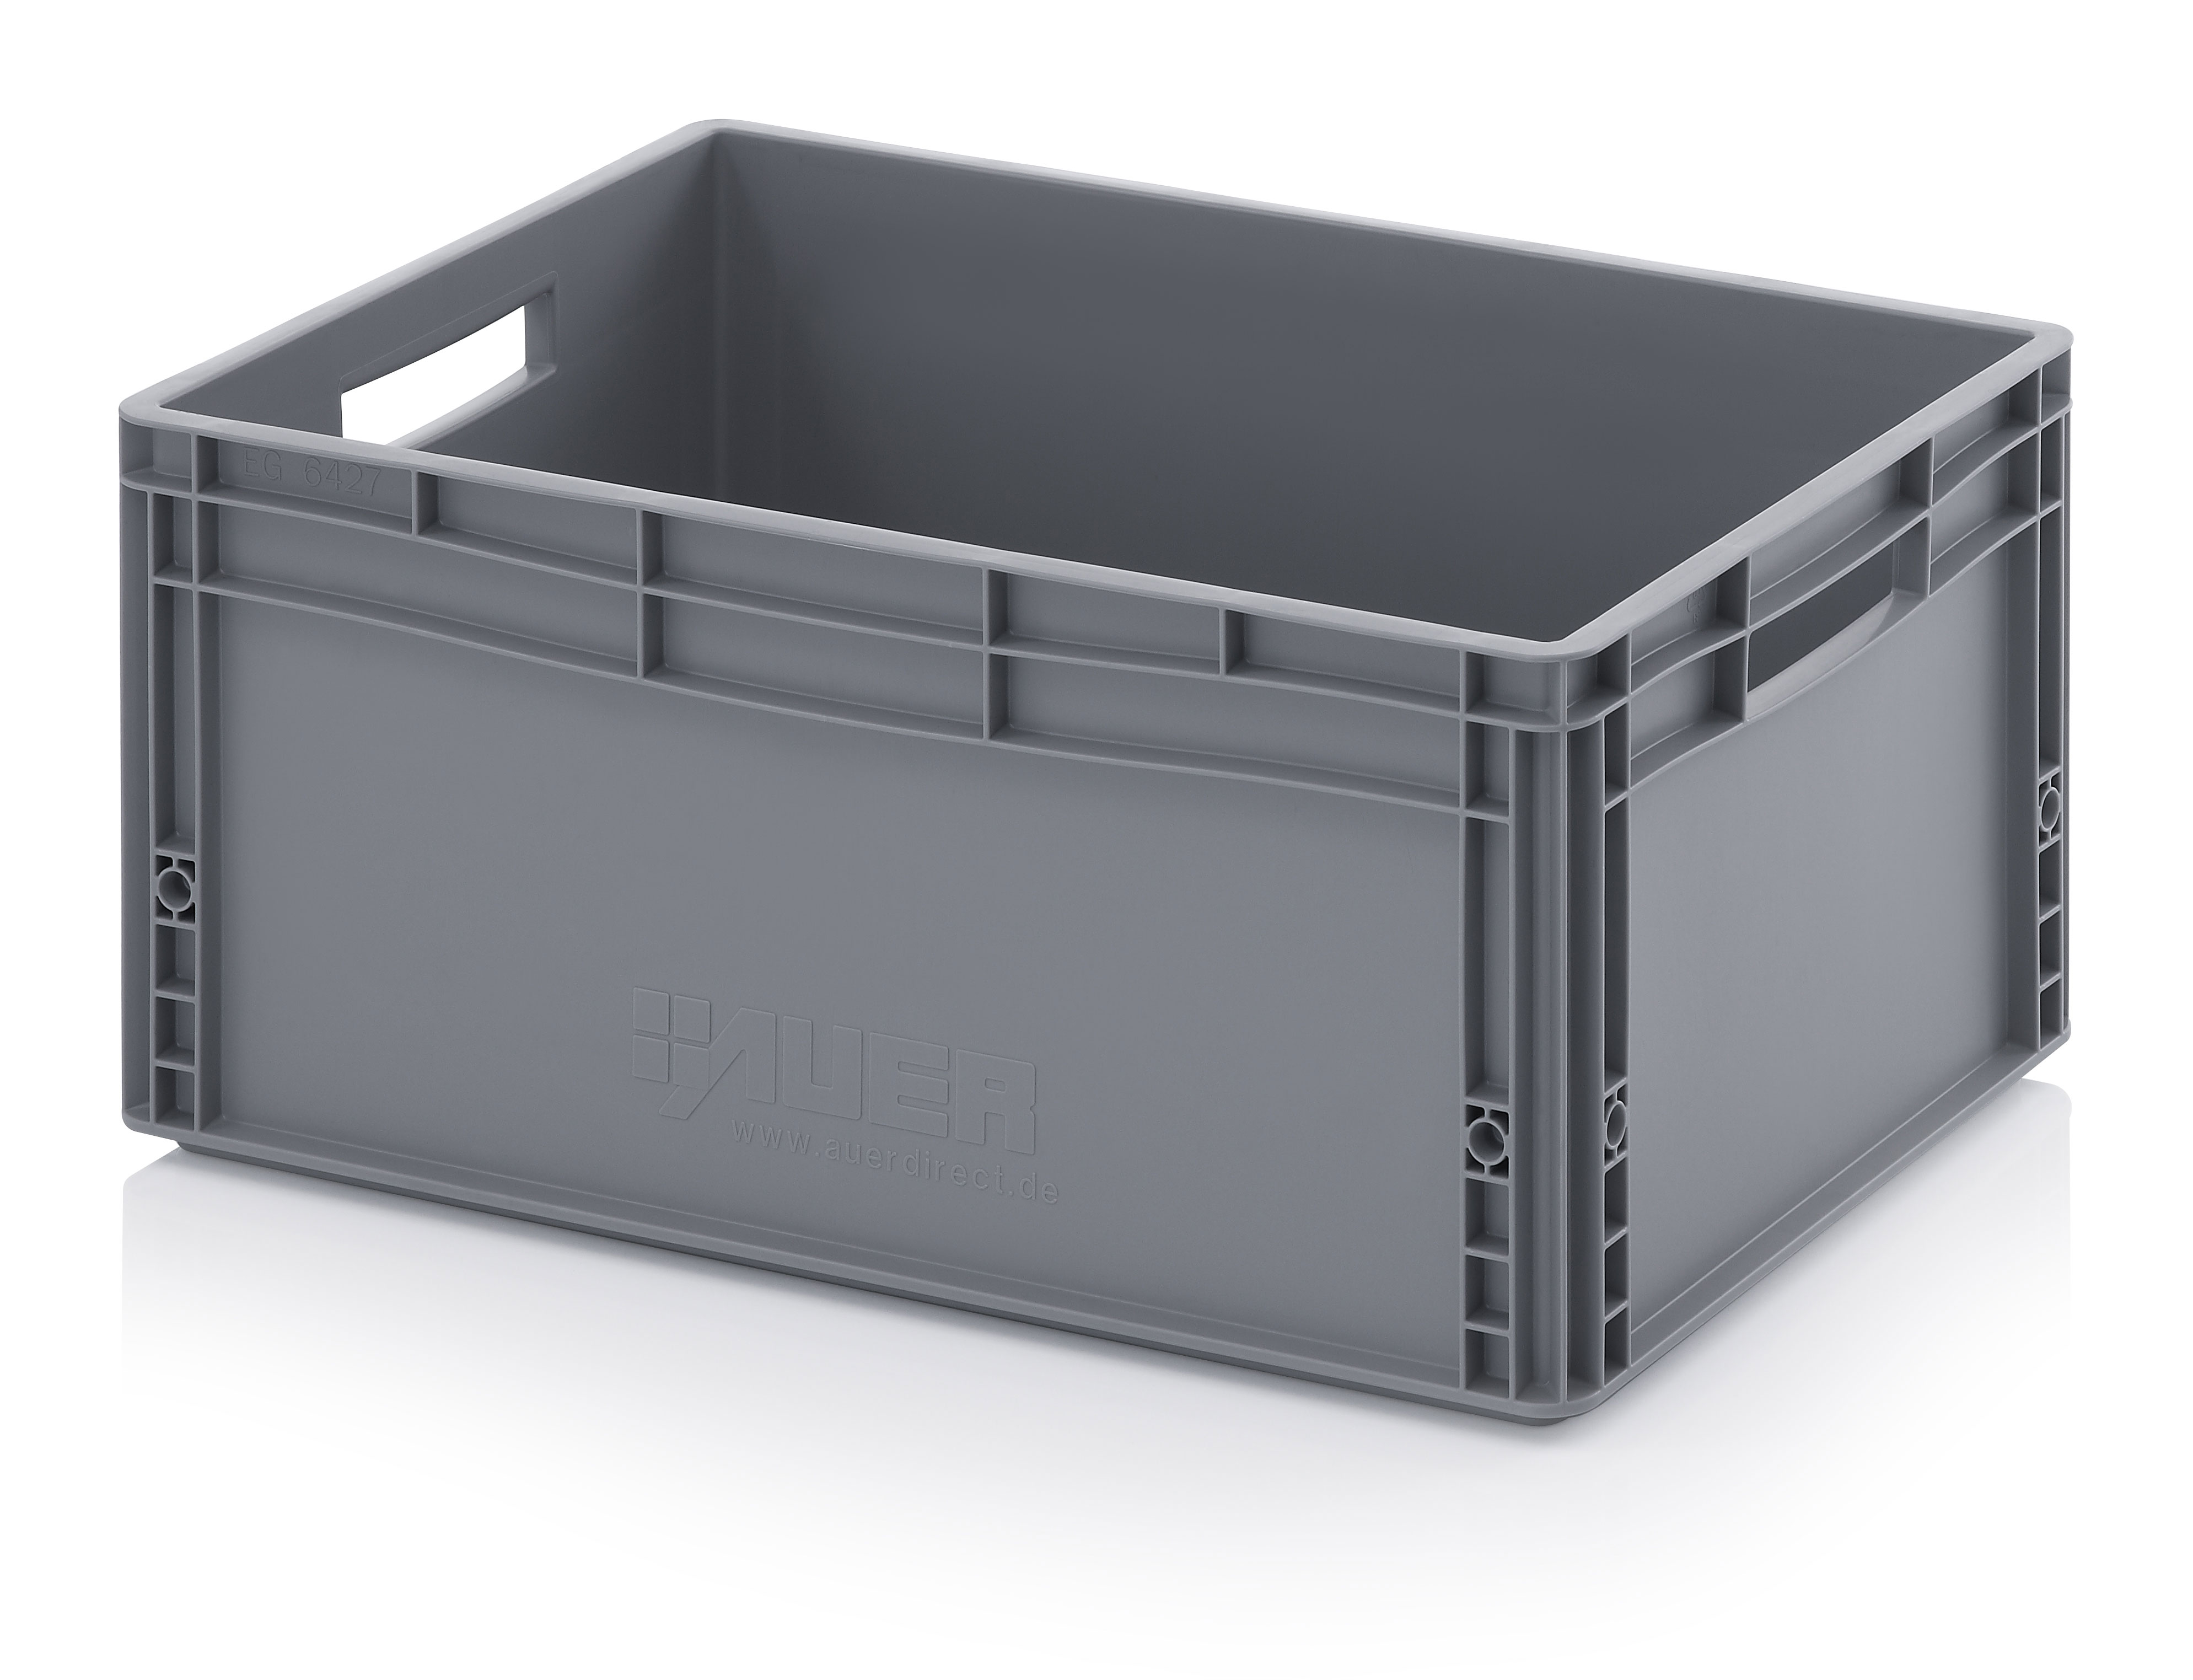 56 Litre Euro Plastic Stacking Container/Storage Box